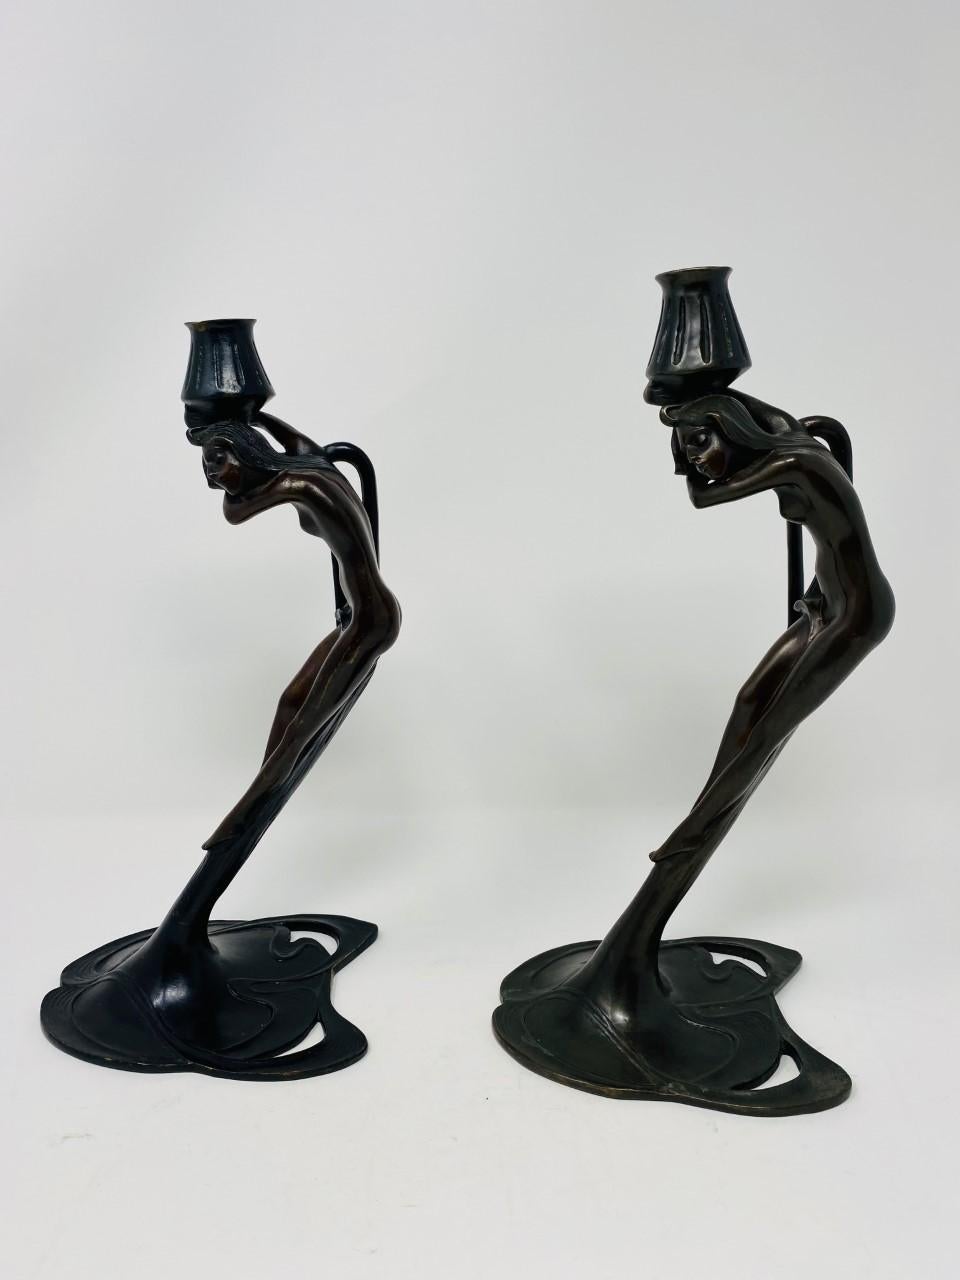 Vintage Art Deco Bronze Nymph Sculpture Candle Holders by MMA 1